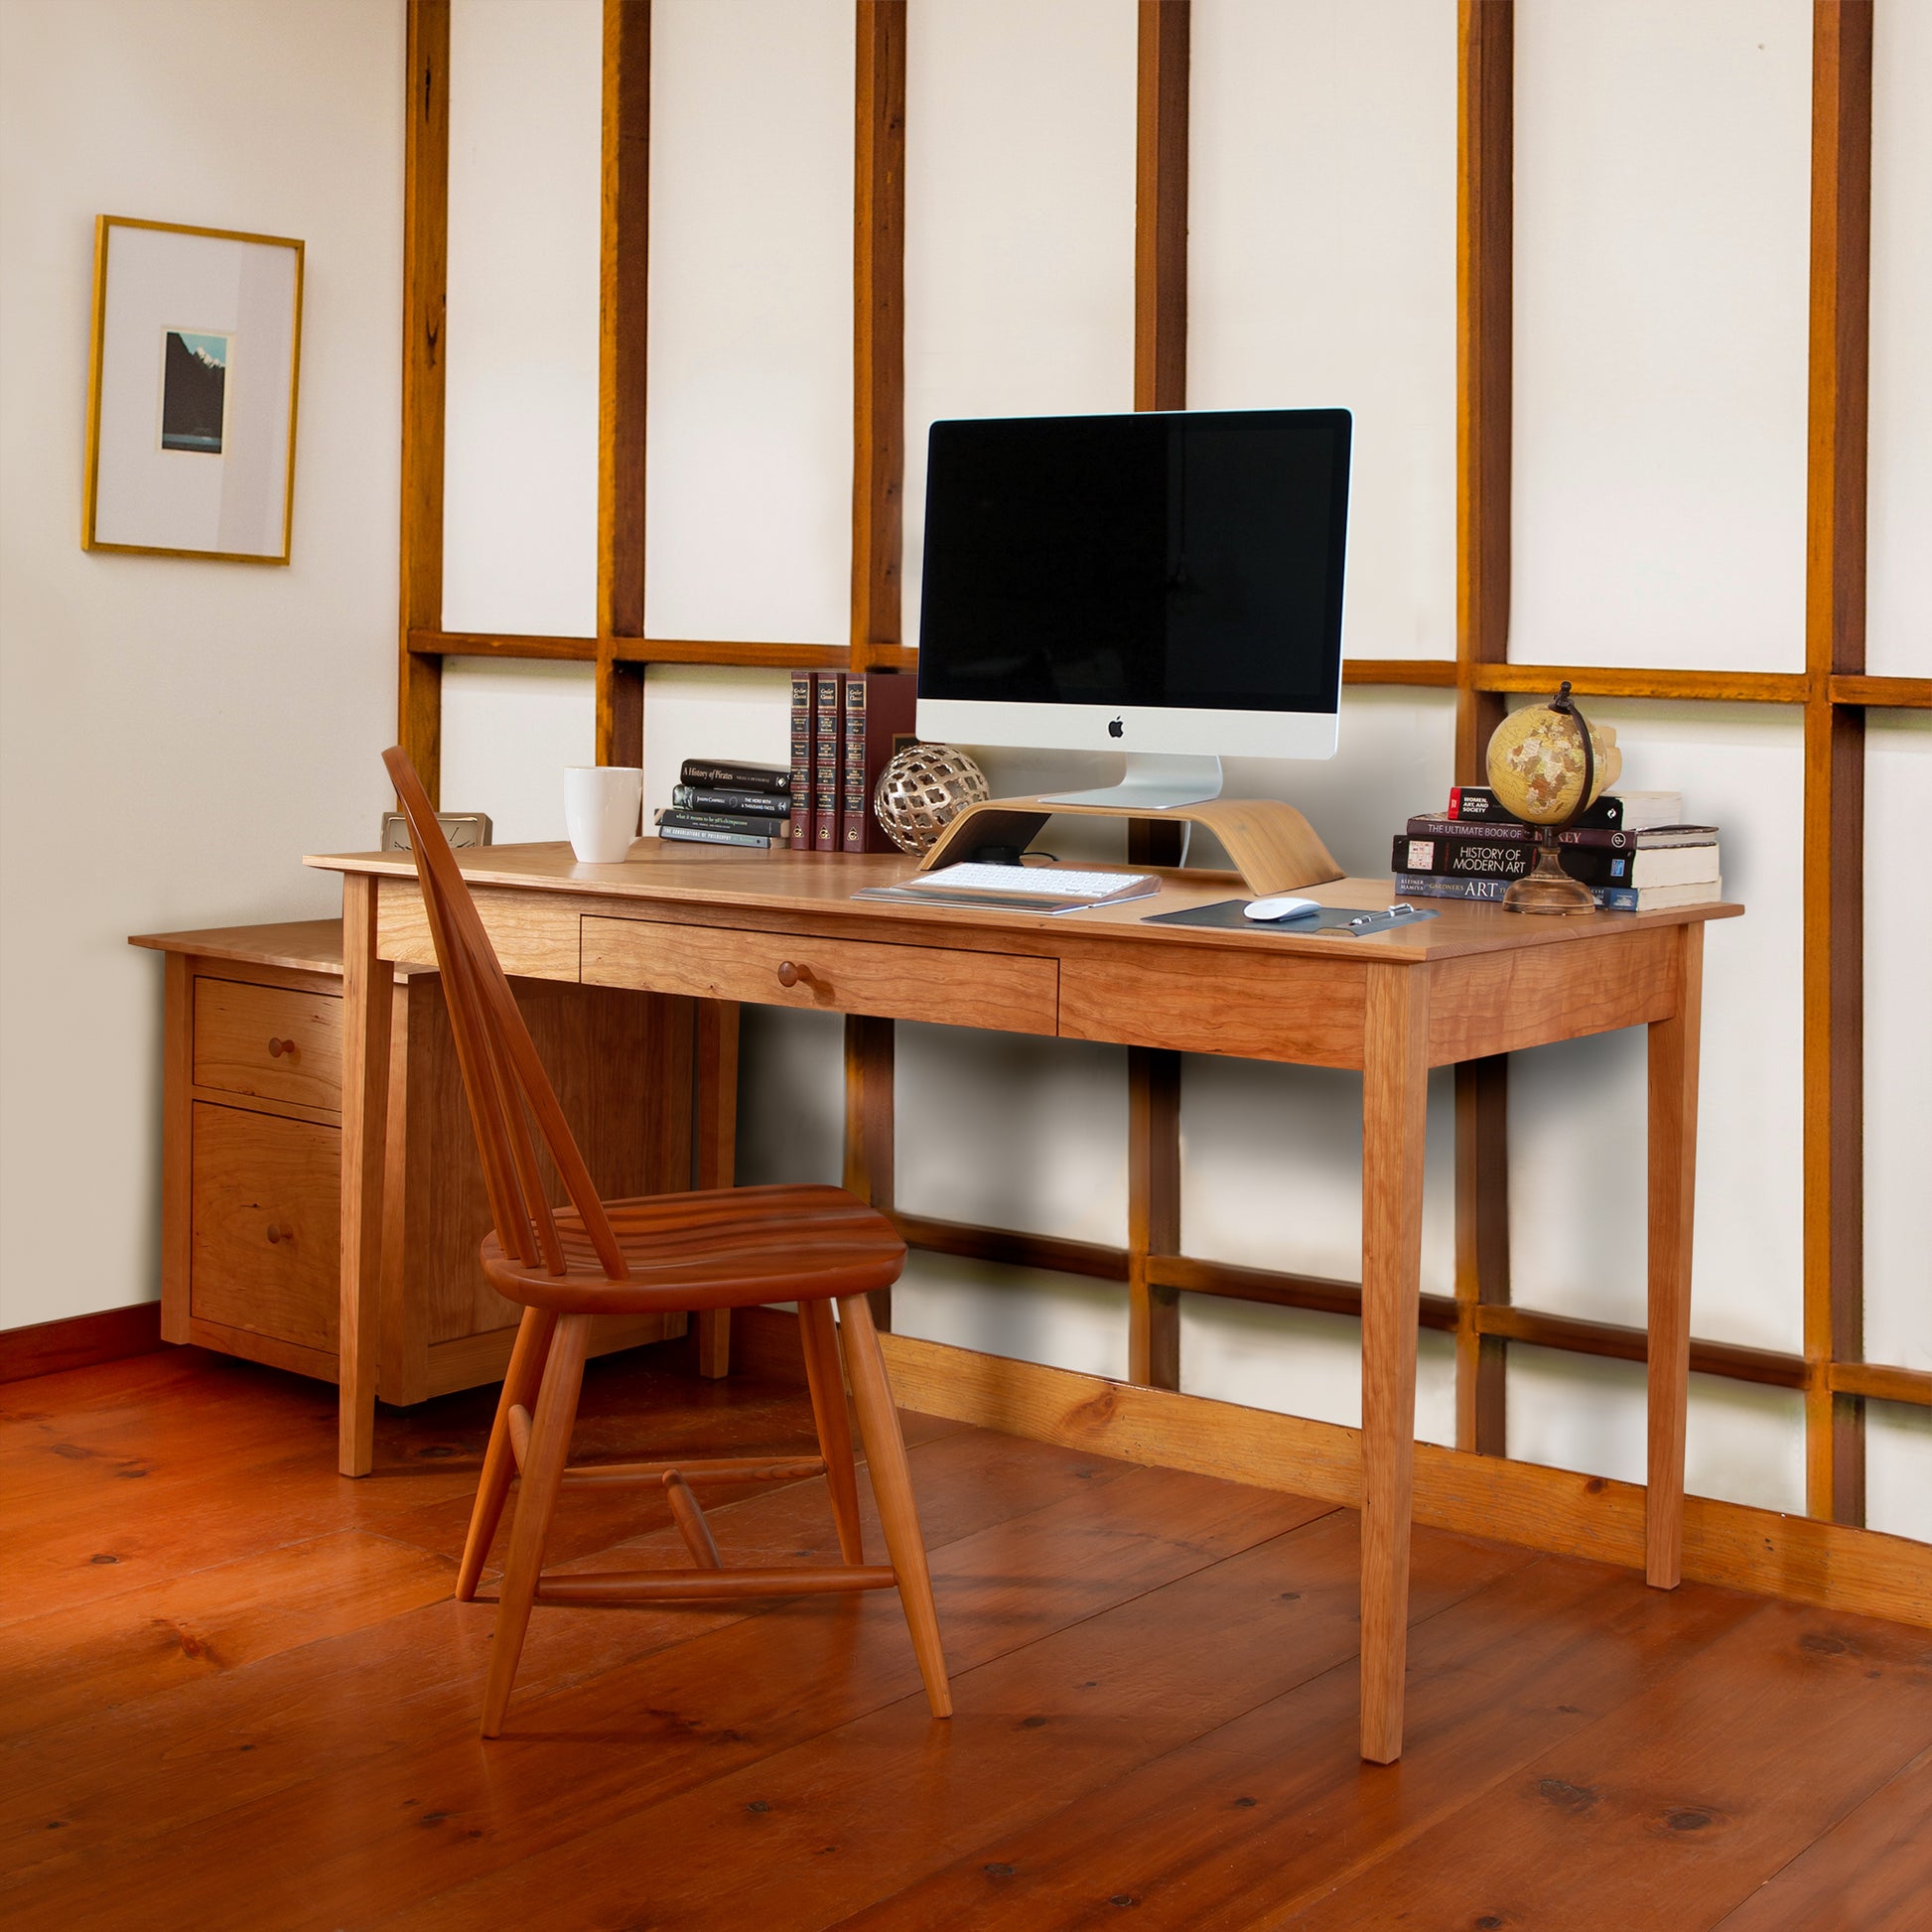 A neatly organized American Shaker Writing Desk by Maple Corner Woodworks with a desktop computer, some stationery, and decorative items in a room with wooden accents and a hardwood floor.